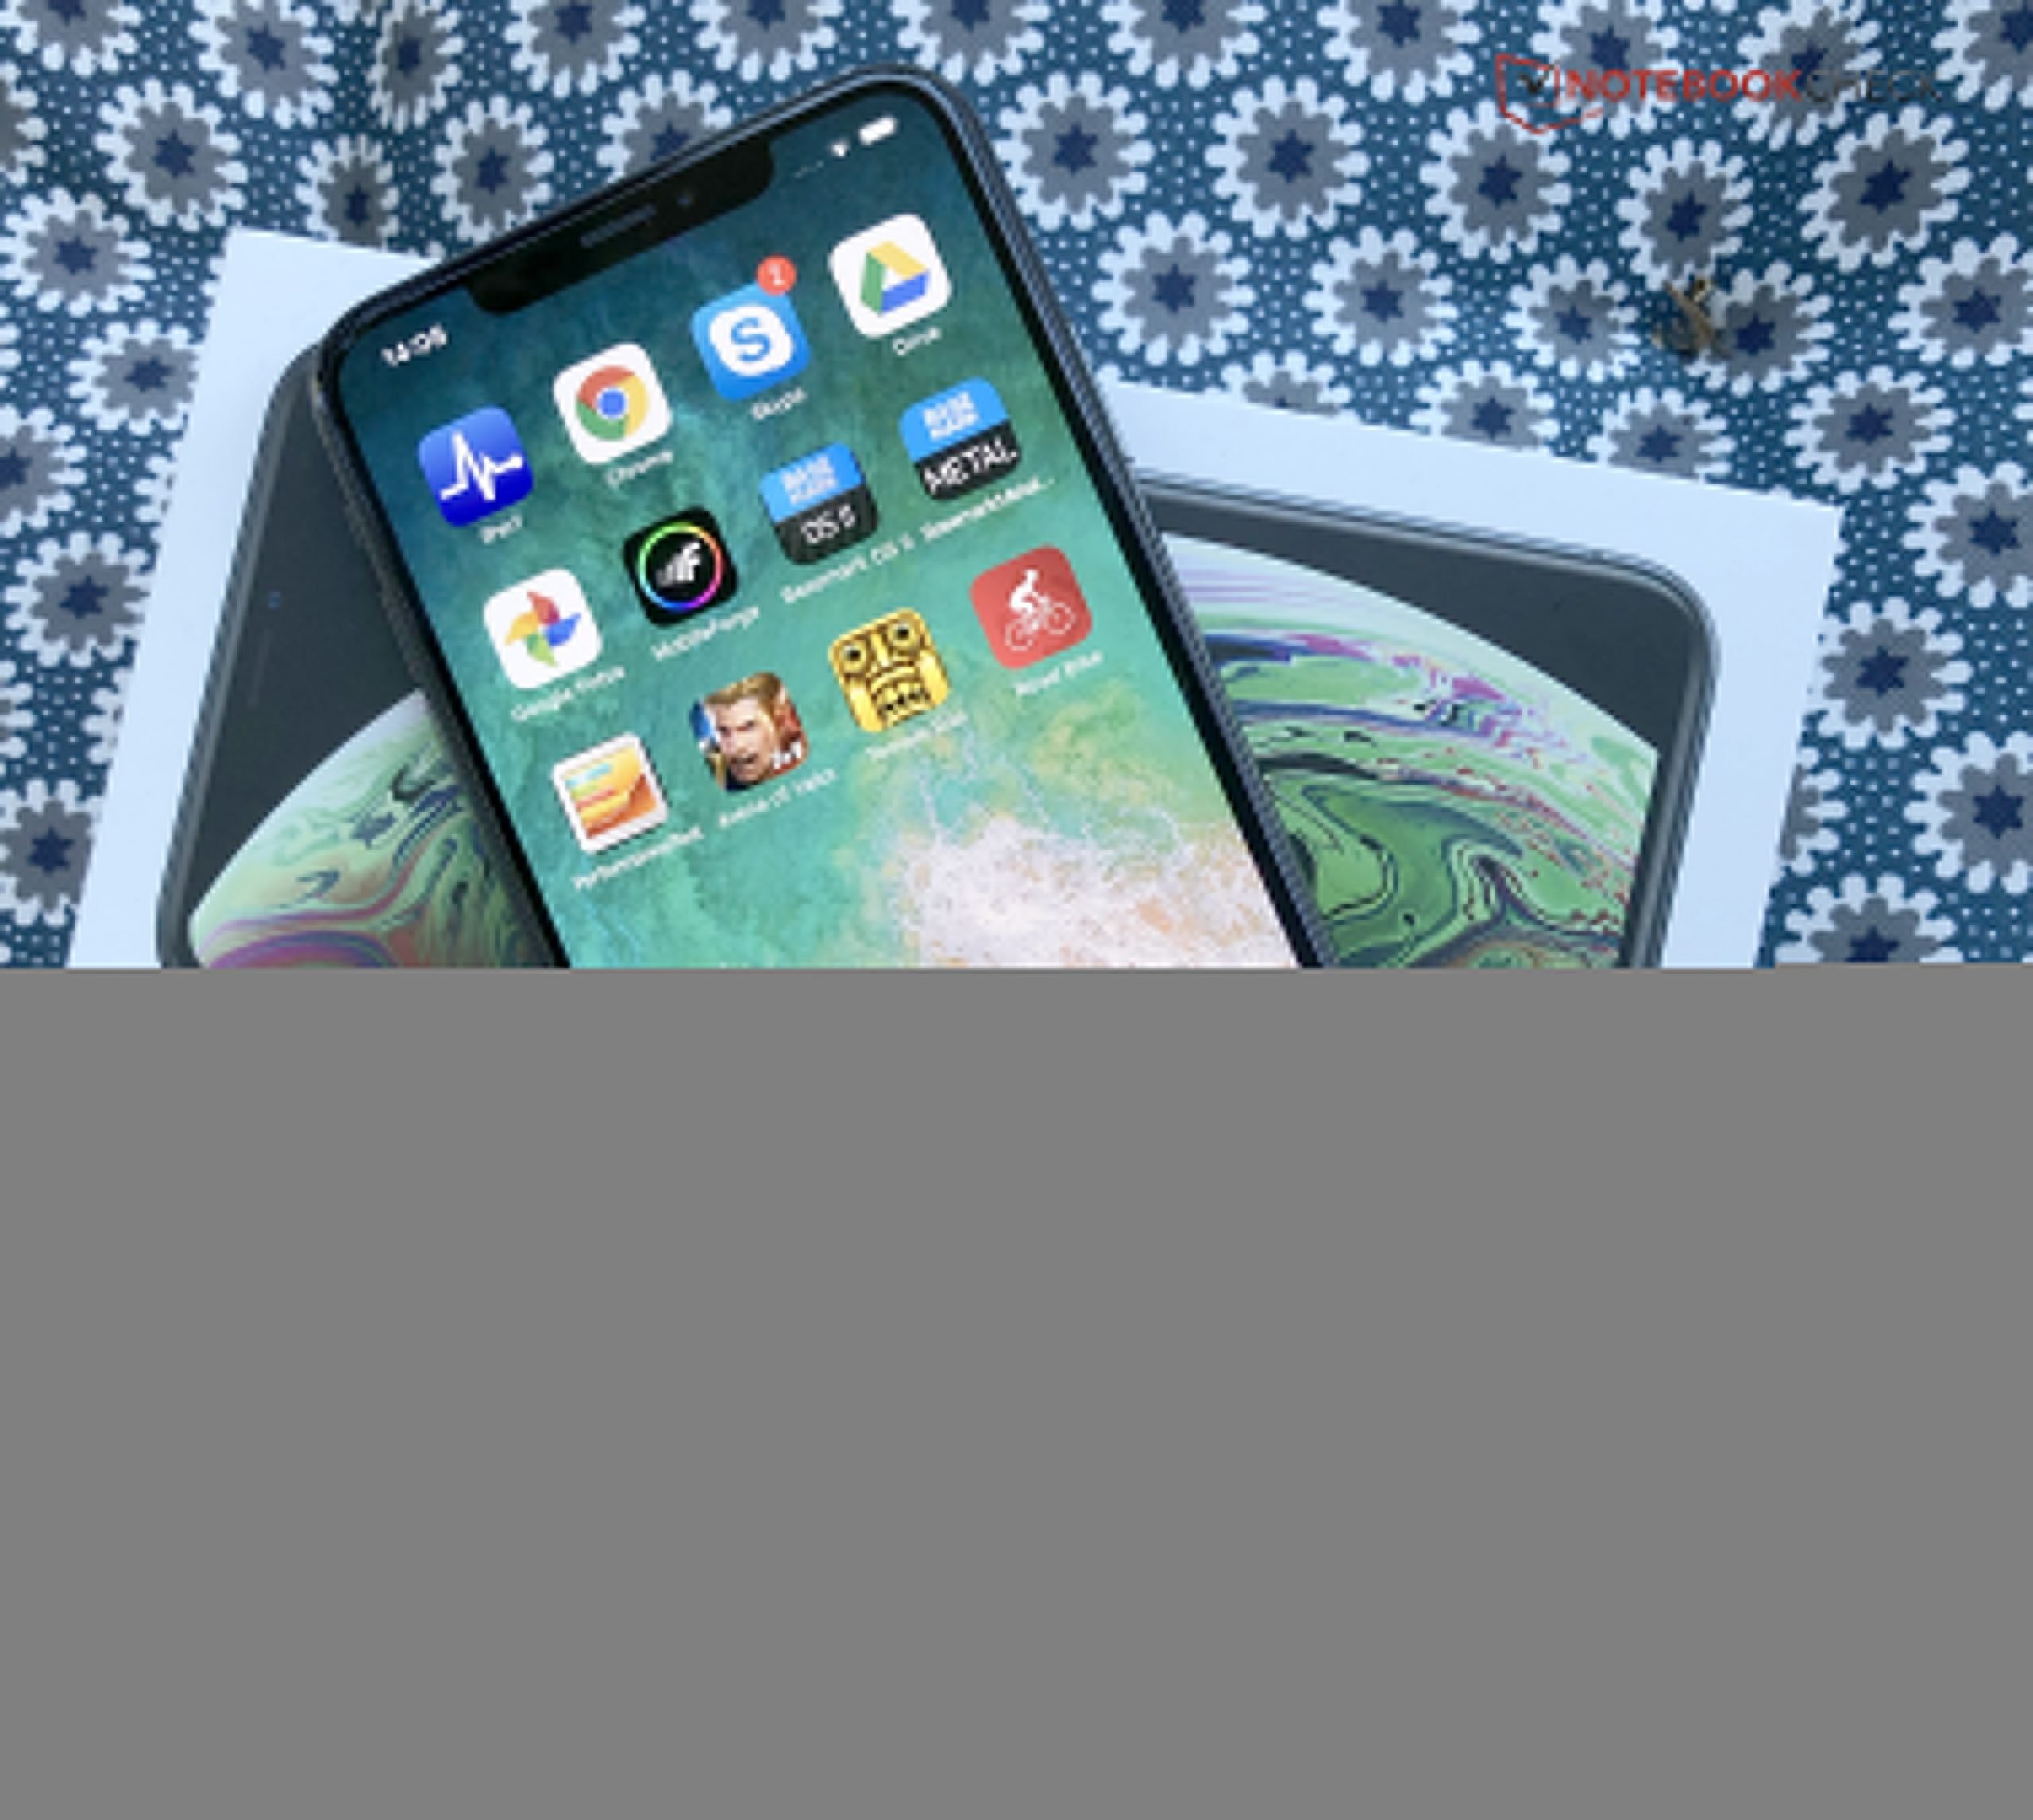 Apple iPhone XS Max Smartphone Review